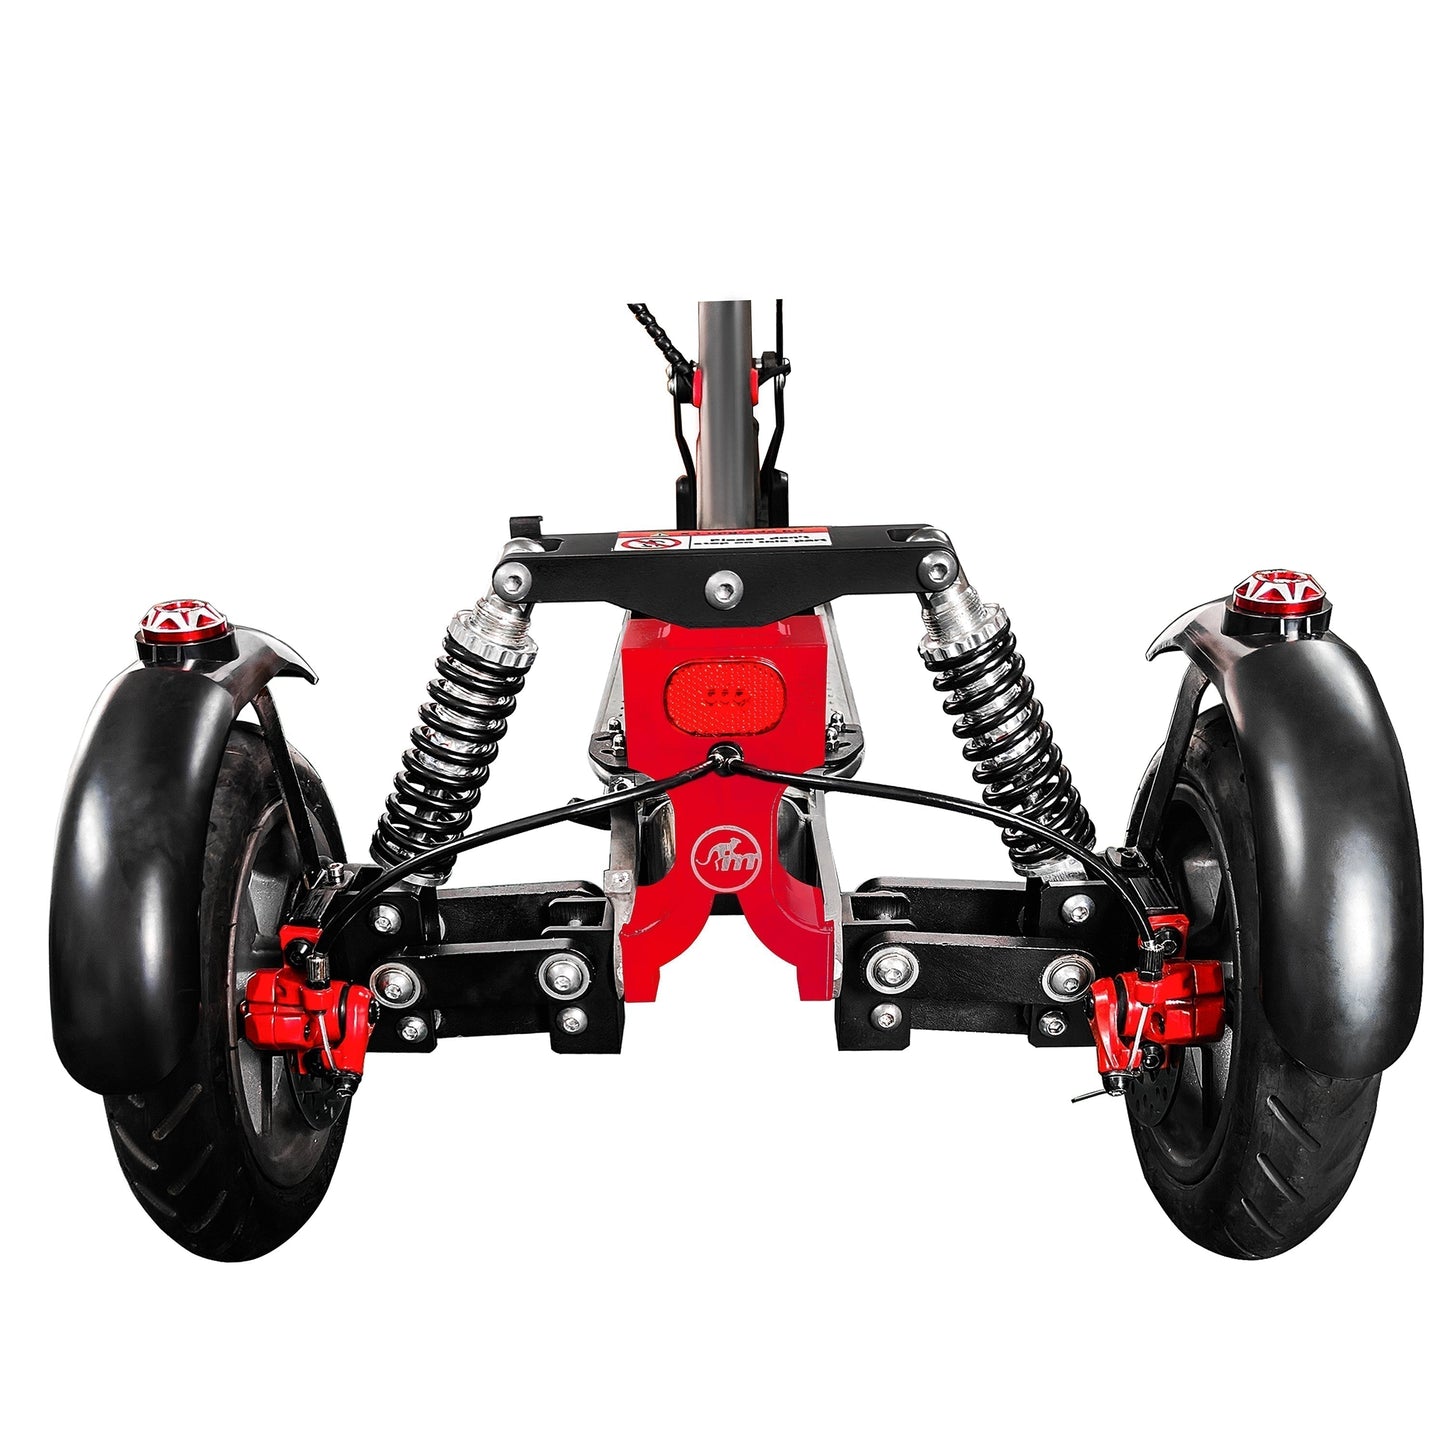 Monorim X3 upgrade kit to be Three wheels special for Kingsong X1 frames